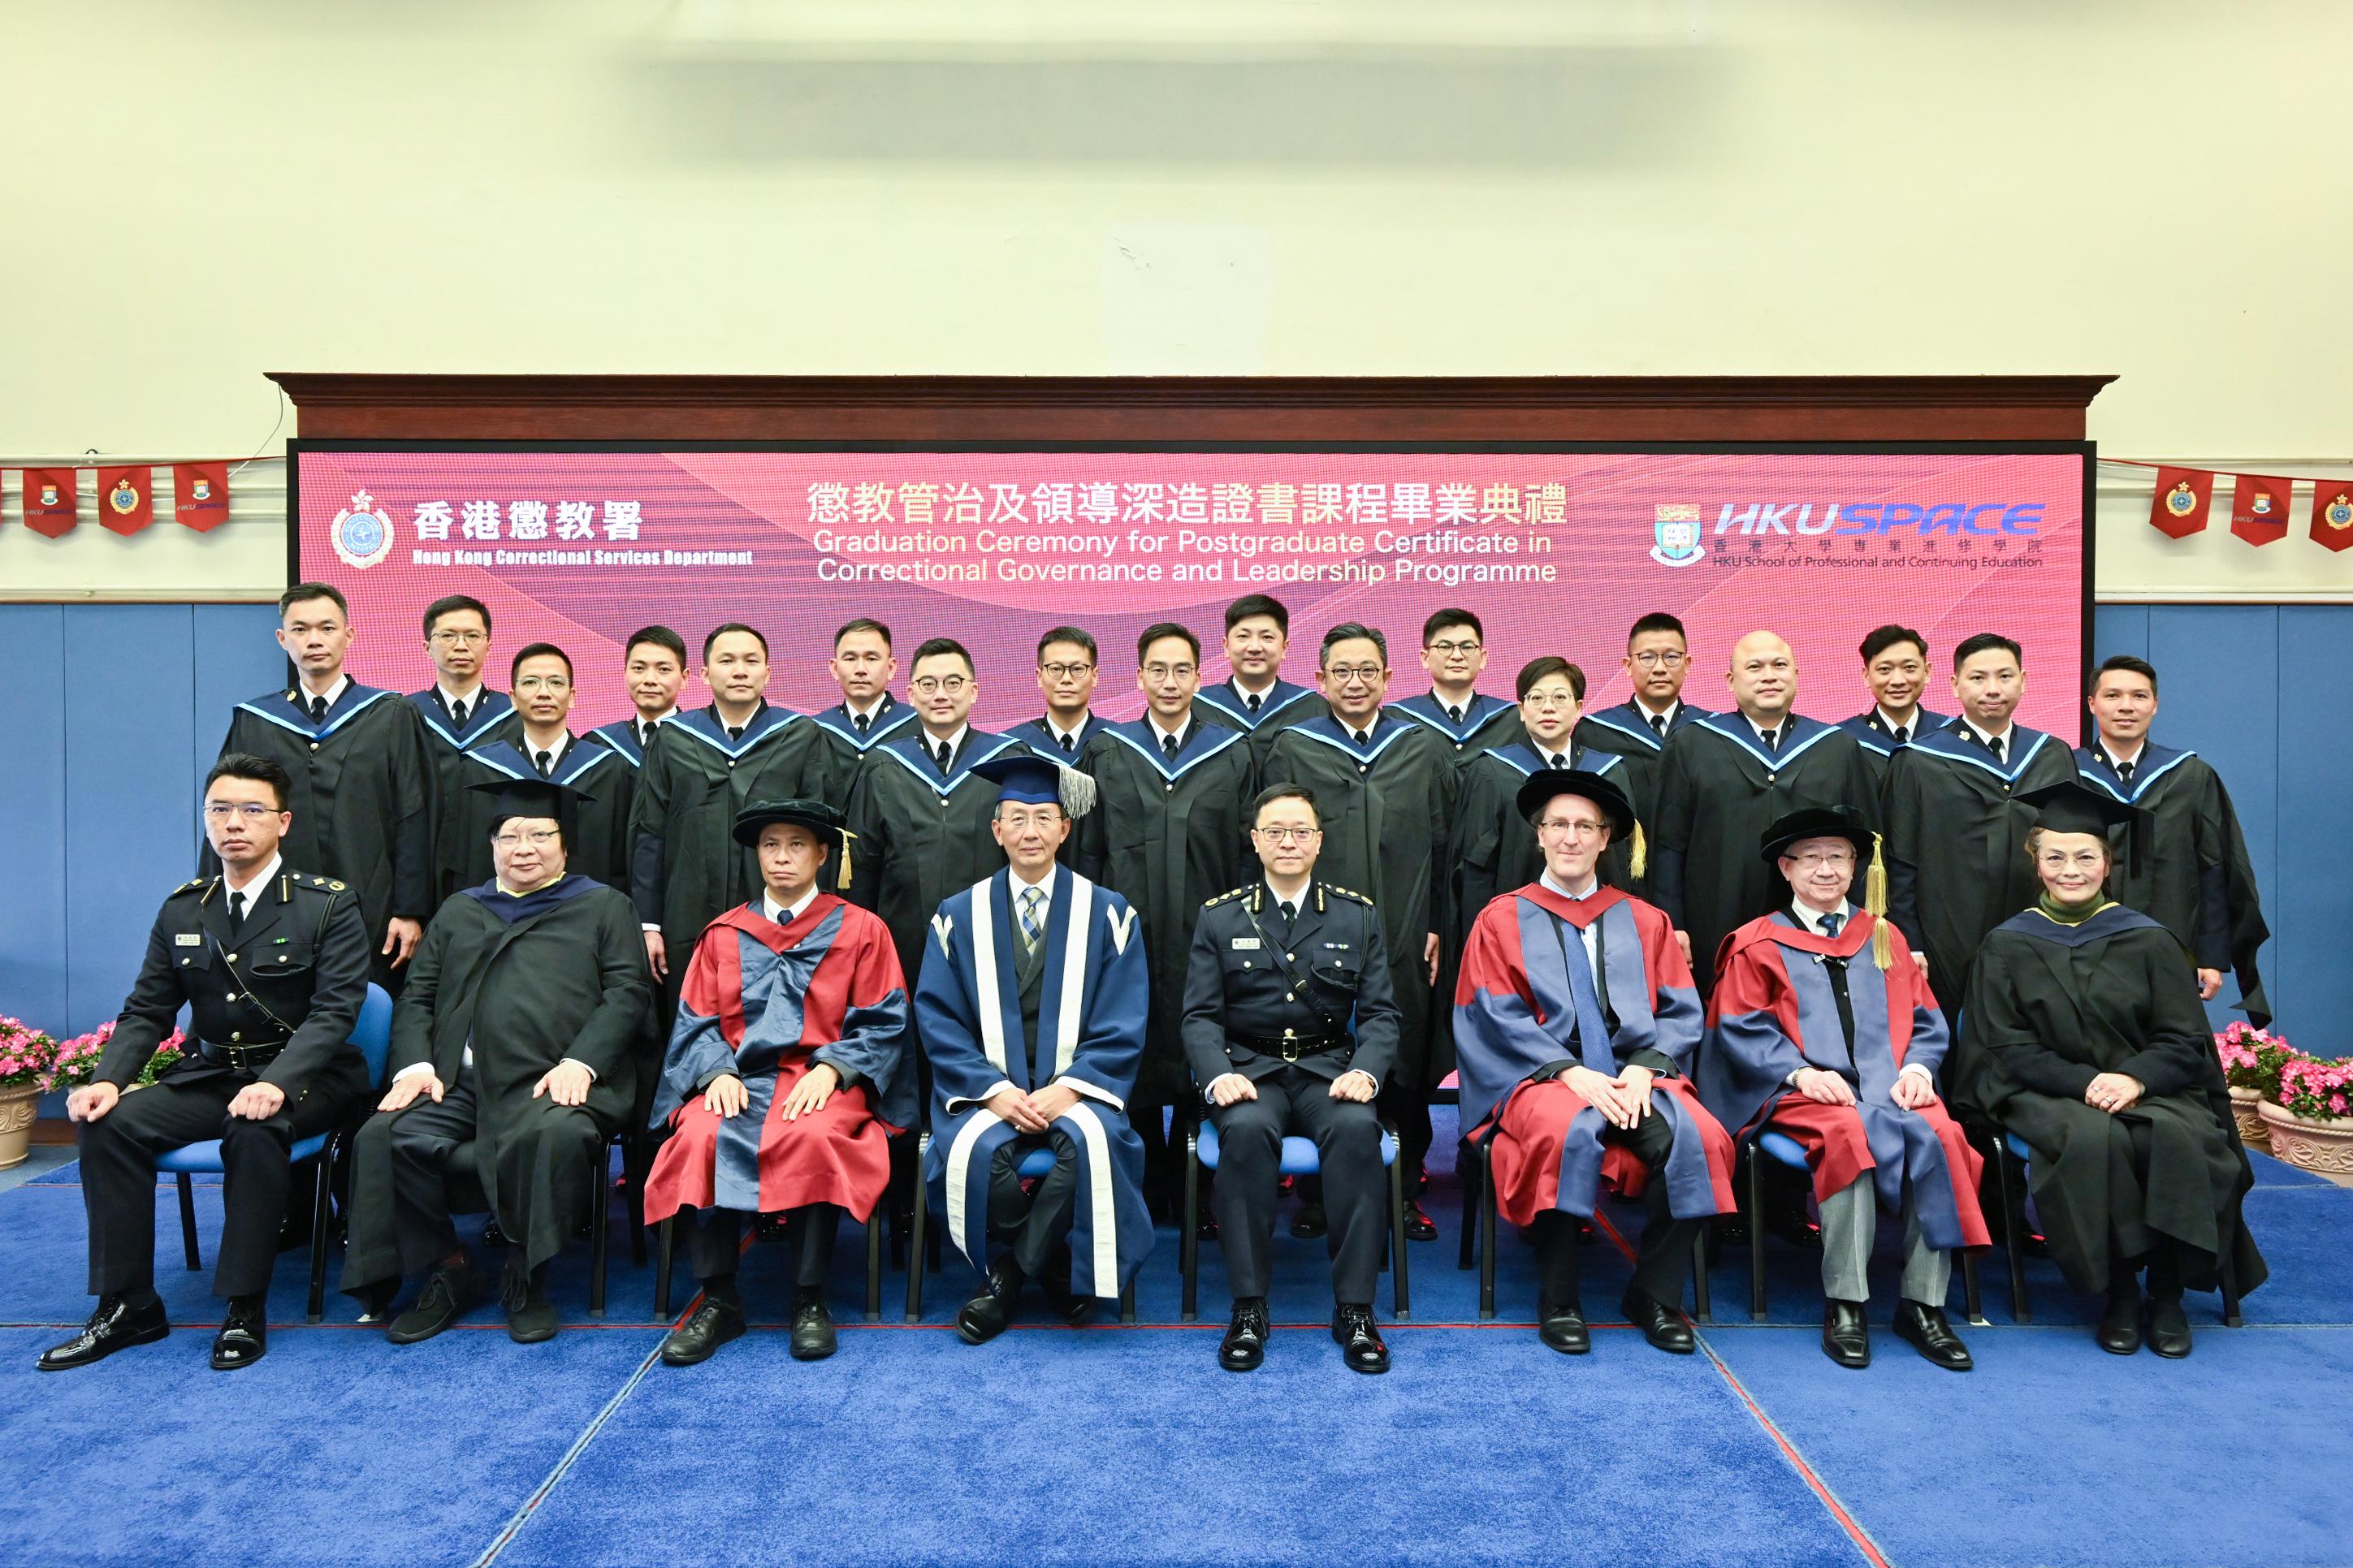 The Correctional Services Department held the first graduation ceremony of the Postgraduate Certificate in Correctional Governance and Leadership Programme at the Hong Kong Correctional Services Academy today (February 22). Photos shows the officiating guests with the graduates at the ceremony.